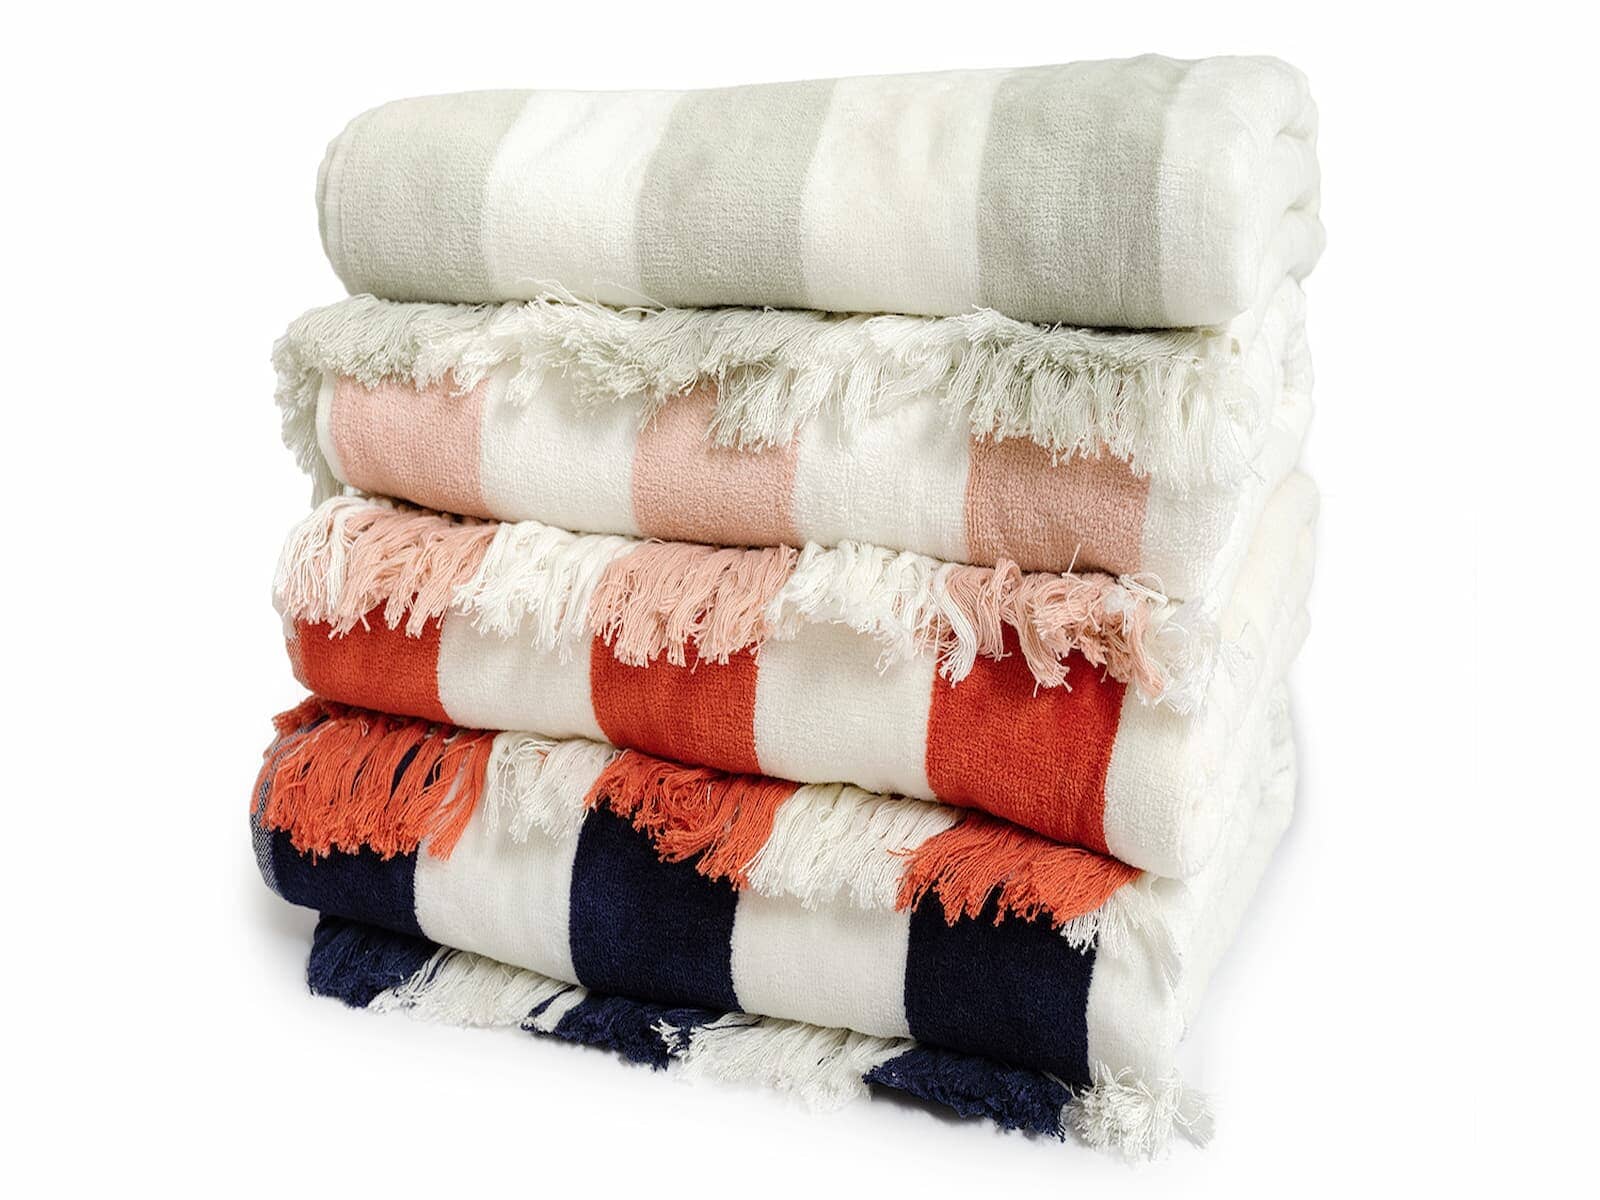 studio image of stack of holiday beach towels